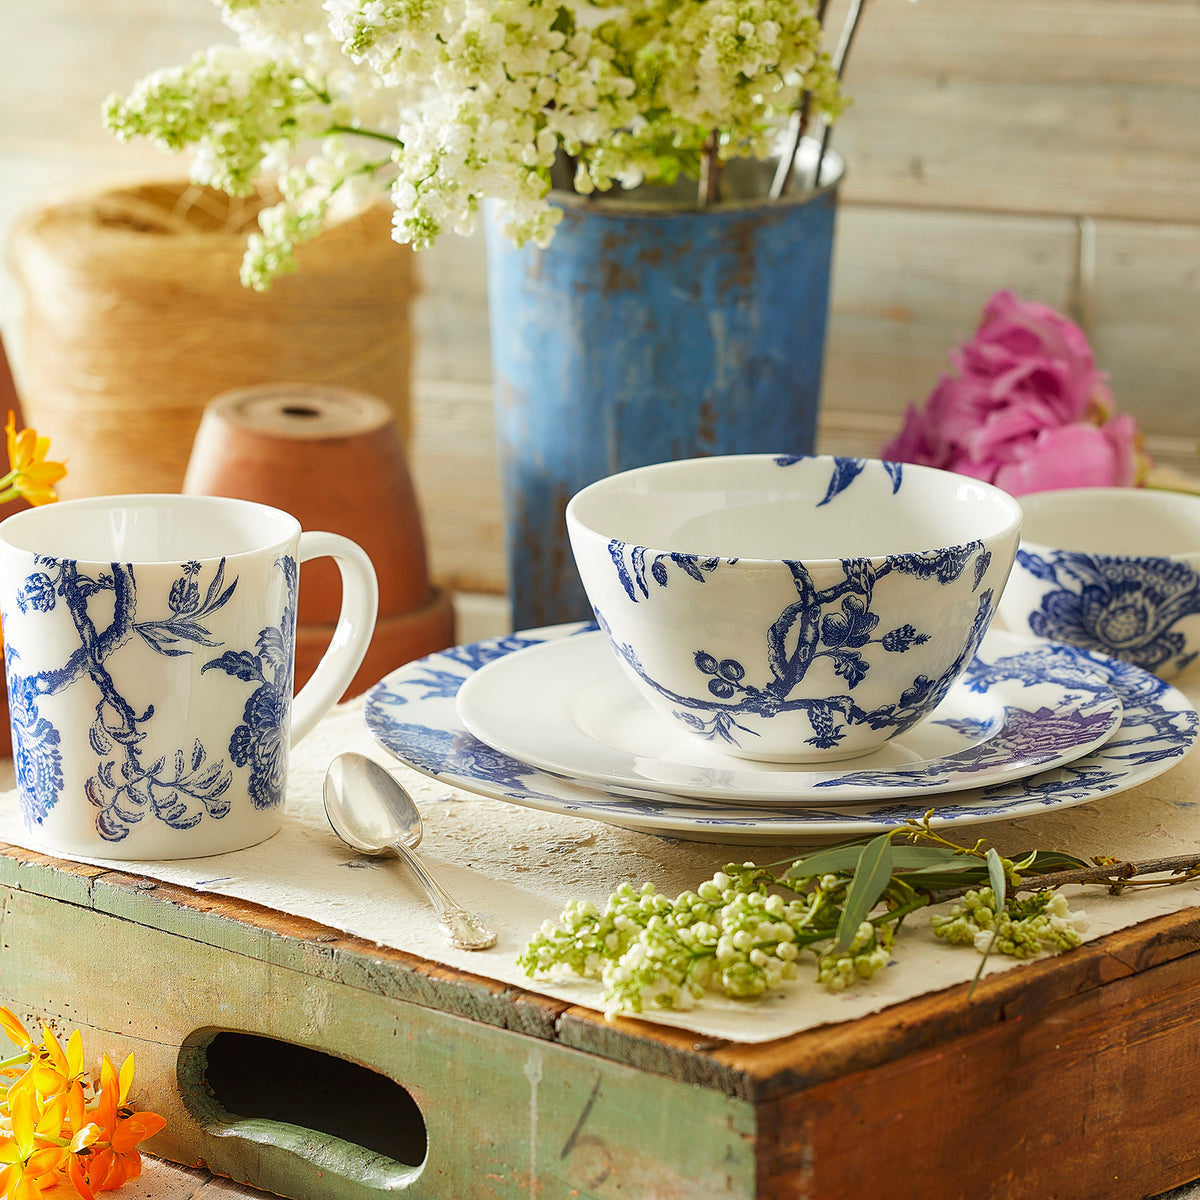 A blue and white floral-patterned Caskata Arcadia Cereal Bowl on a rustic green wooden tray, surrounded by flowers, a spool of twine, and a blue metal container holding white blossoms.